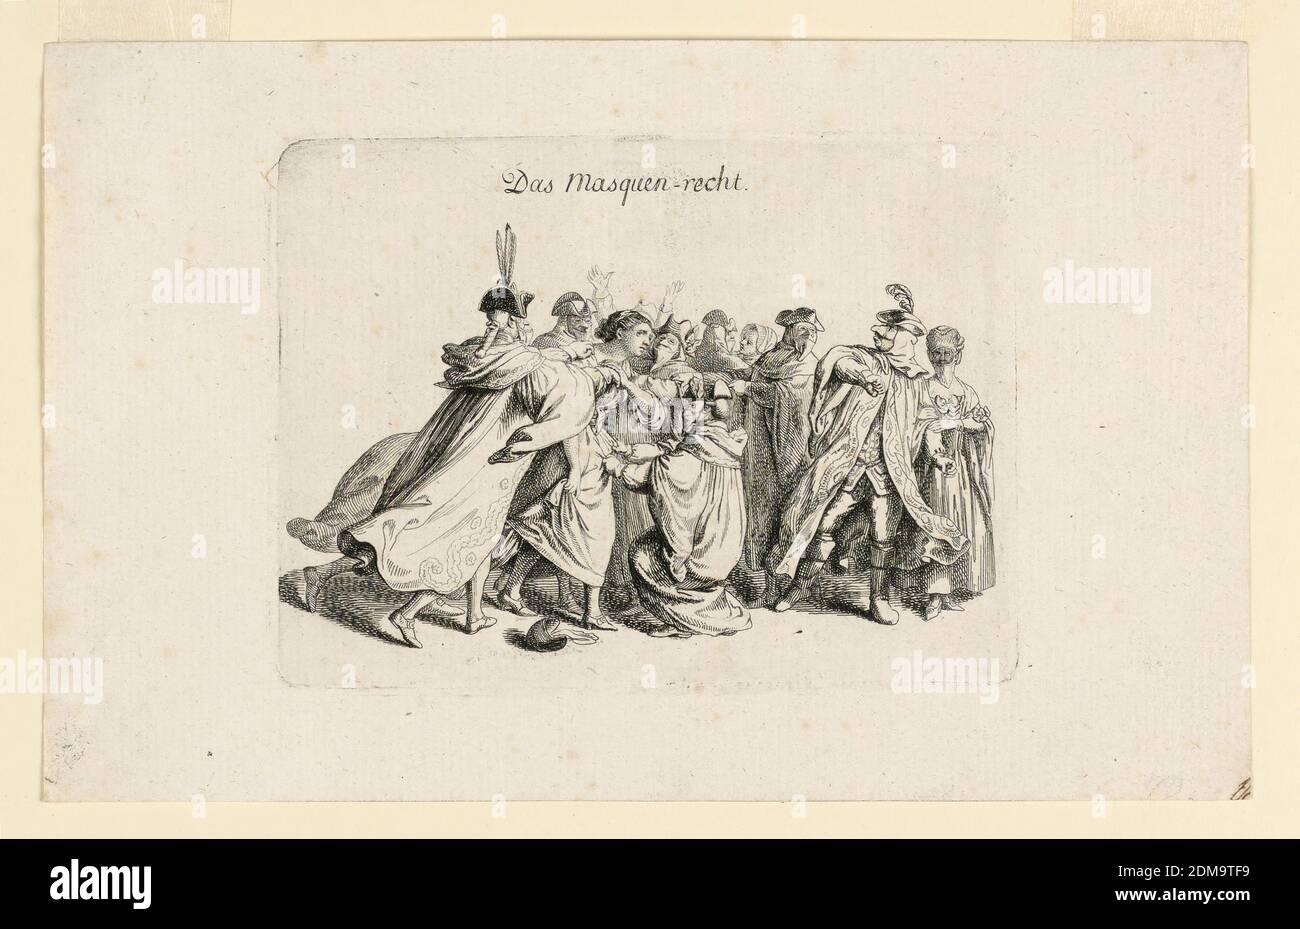 A Masquerade, Daniel Nikolaus Chodowiecki, German, 1726 - 1801, Engraving on paper, Numerous masked figures are clutching at an unmasked woman, who attempts to escape from the crowd. Inscribed above: Das Masquenrecht., Germany, 1775, Print Stock Photo